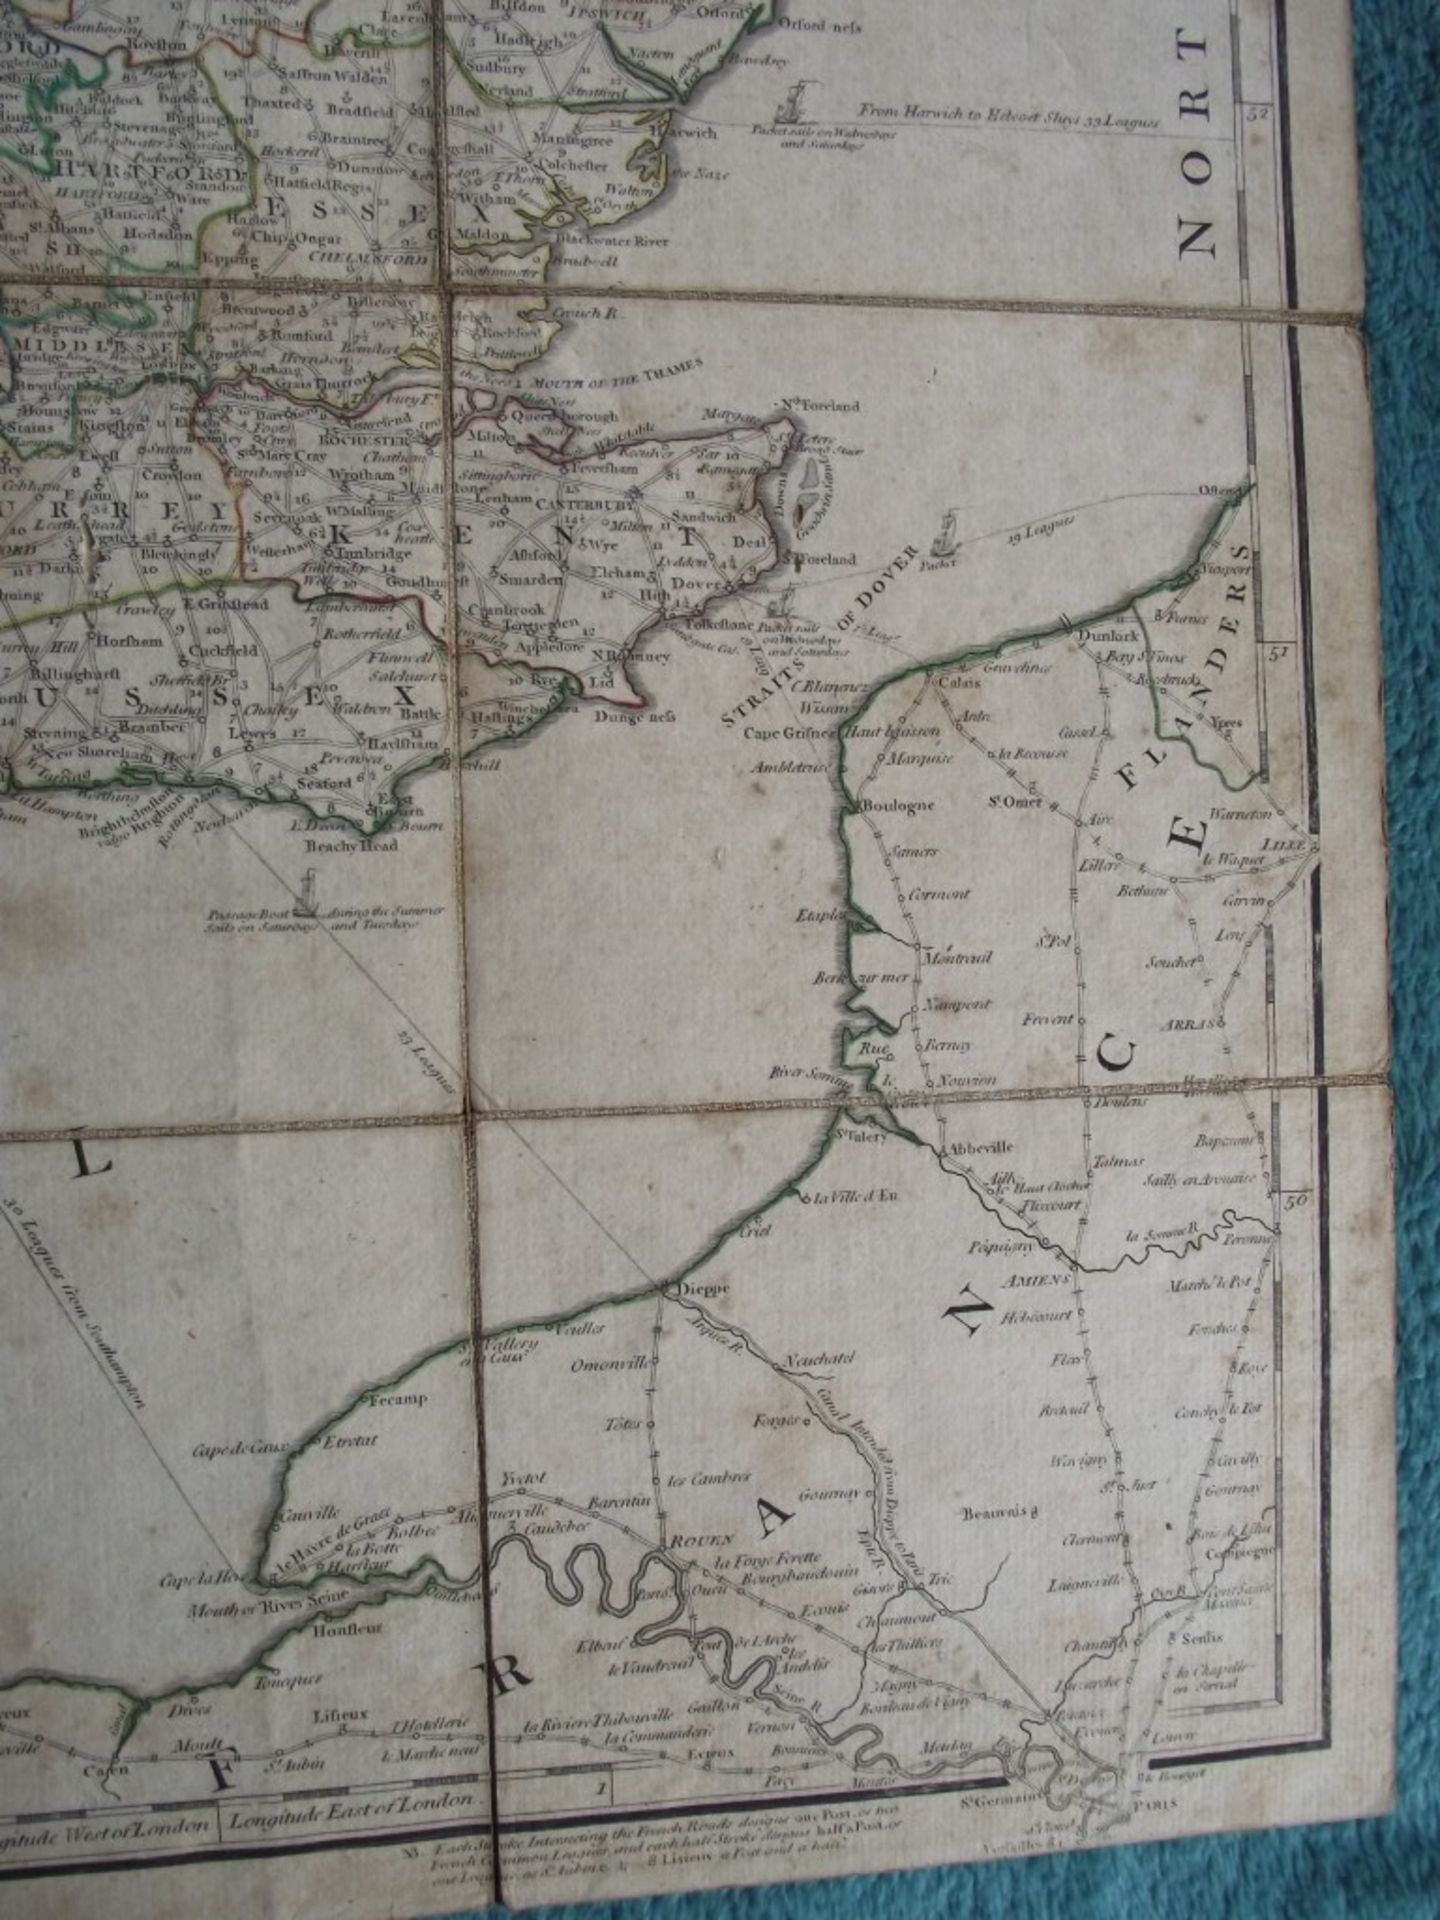 A New Map of the Roads of Ireland and Scotland - by Laurie & Whittle - 12th May 1794 - Original c... - Image 11 of 31